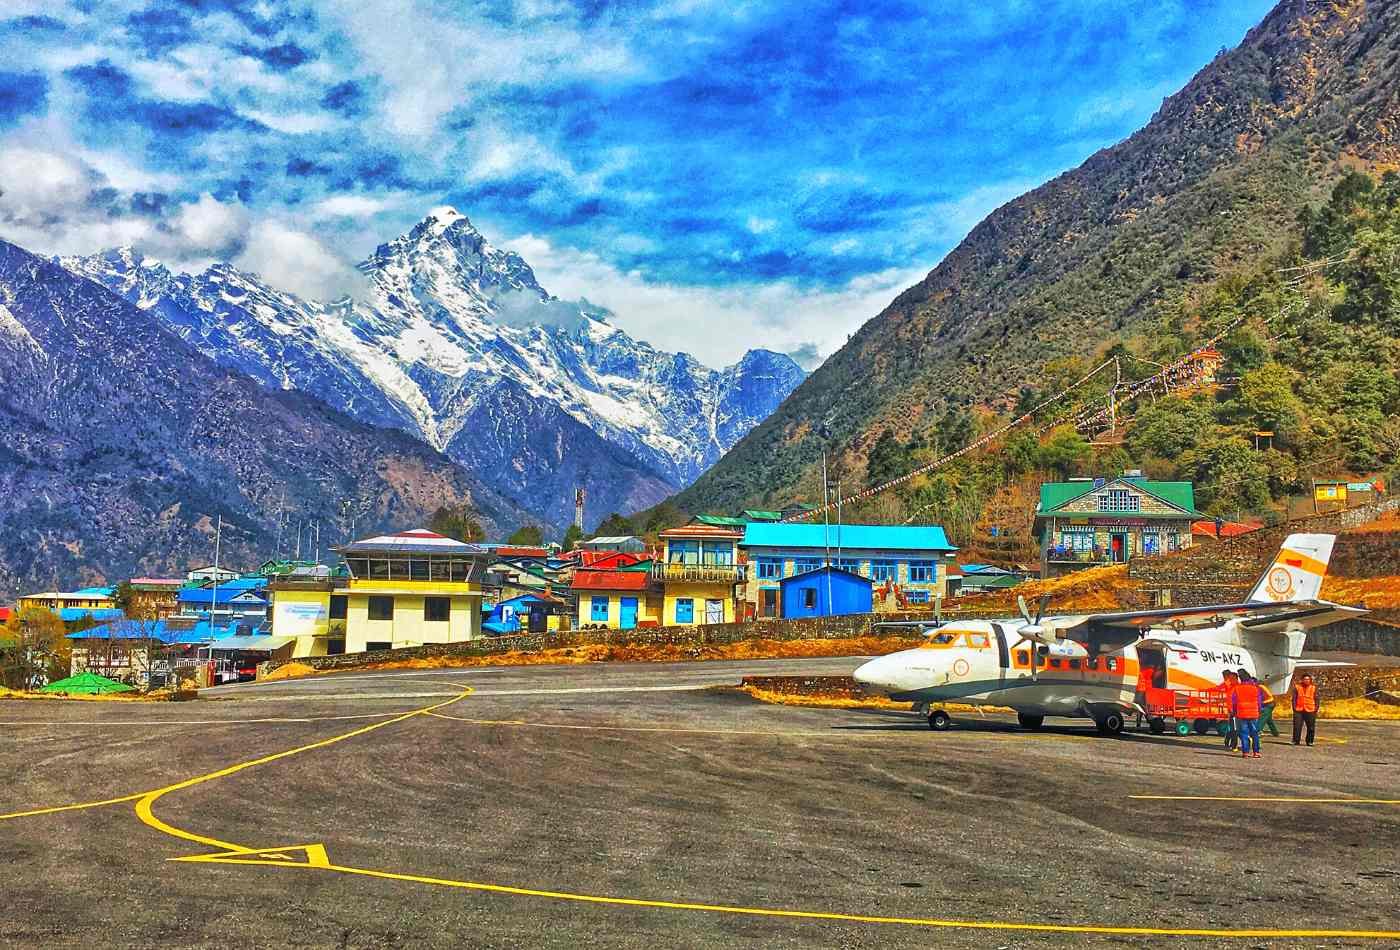 An airplane safely landed on the runway at Lukla Airport, surrounded by houses of Lukla village and with the majestic Kogde mountain looming in the background.